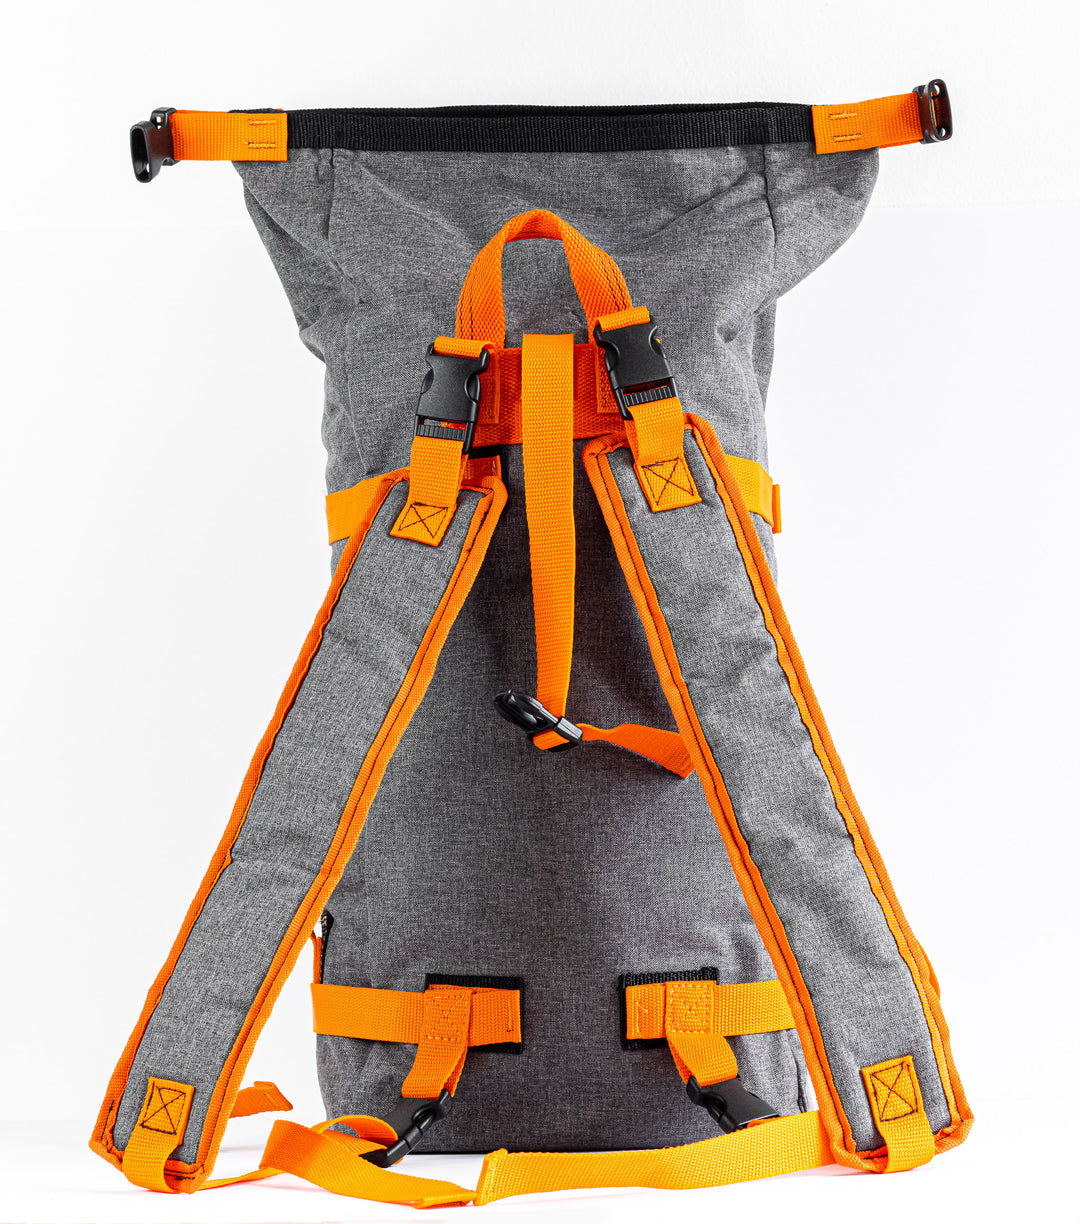 rear view of the backpack with the roll top full extended upwards.  This shows the opening from the rear, the sturdy stitching at the top and the buckles on the end.  the strap that holds the roll over top in place is seen fully extended in the rear picture. 